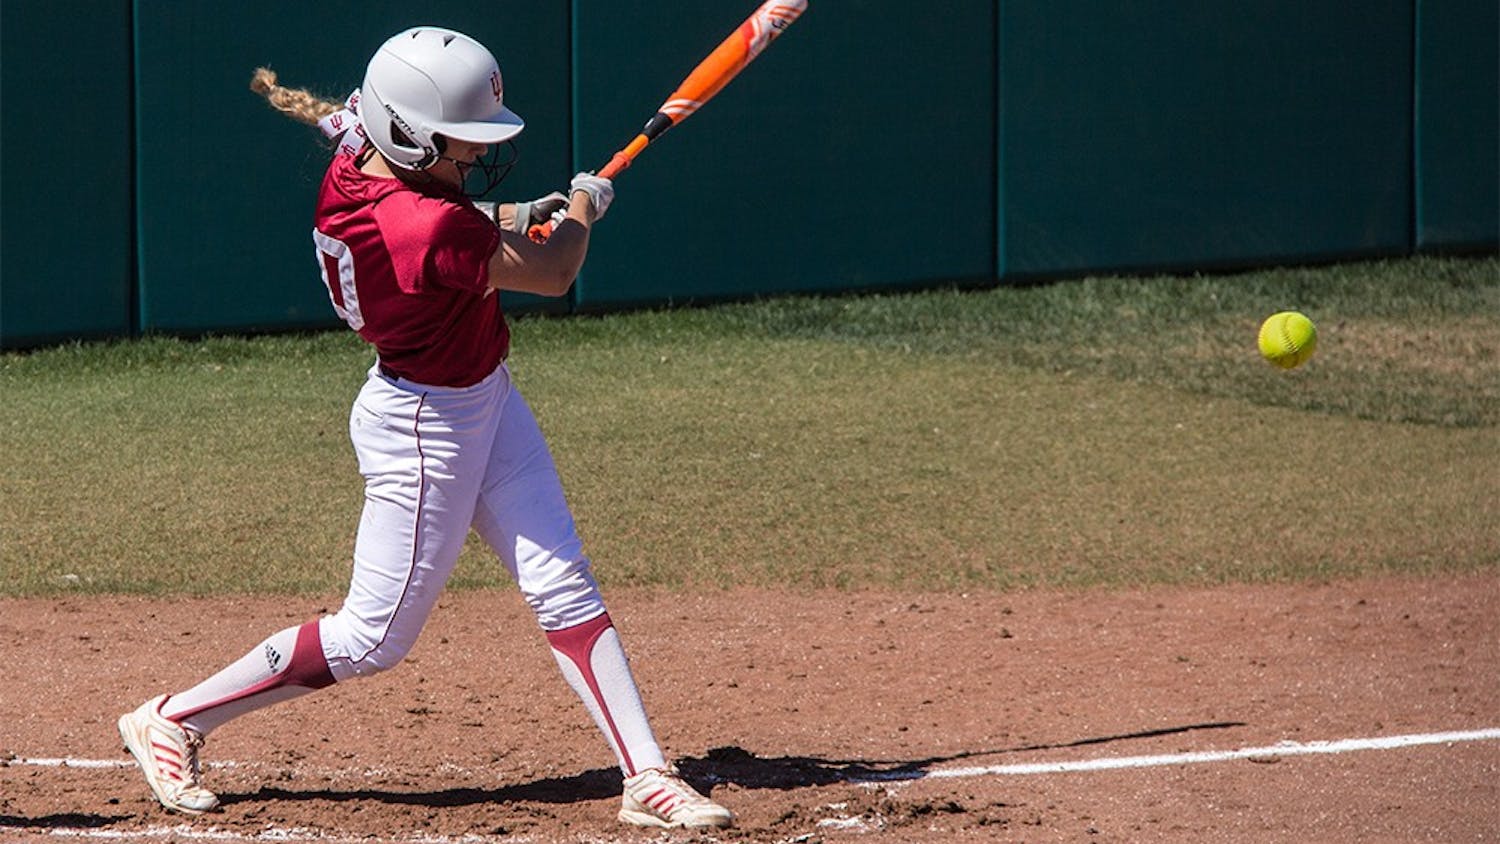 Freshman Sarah Galovich swings at a pitch on Saturday in a 9-3 win against University of Iowa at Andy Mohr Field.